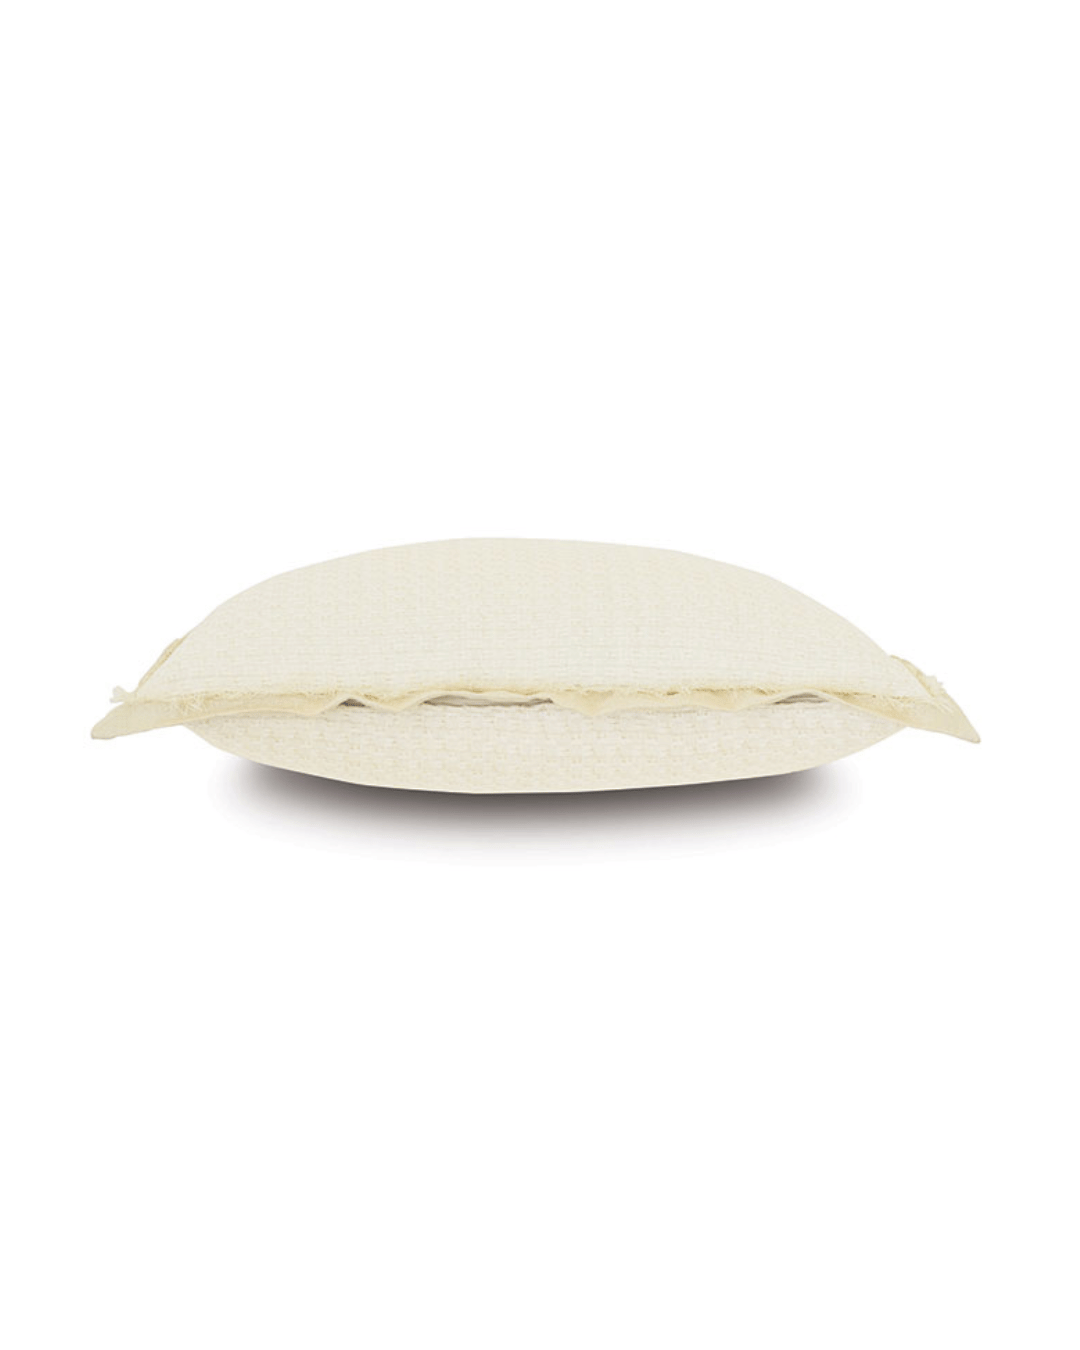 A plain beige pillow with a Eastern Accents TEXTURED MATELASSE EURO SHAM cover in Arizona style, isolated on a white background.